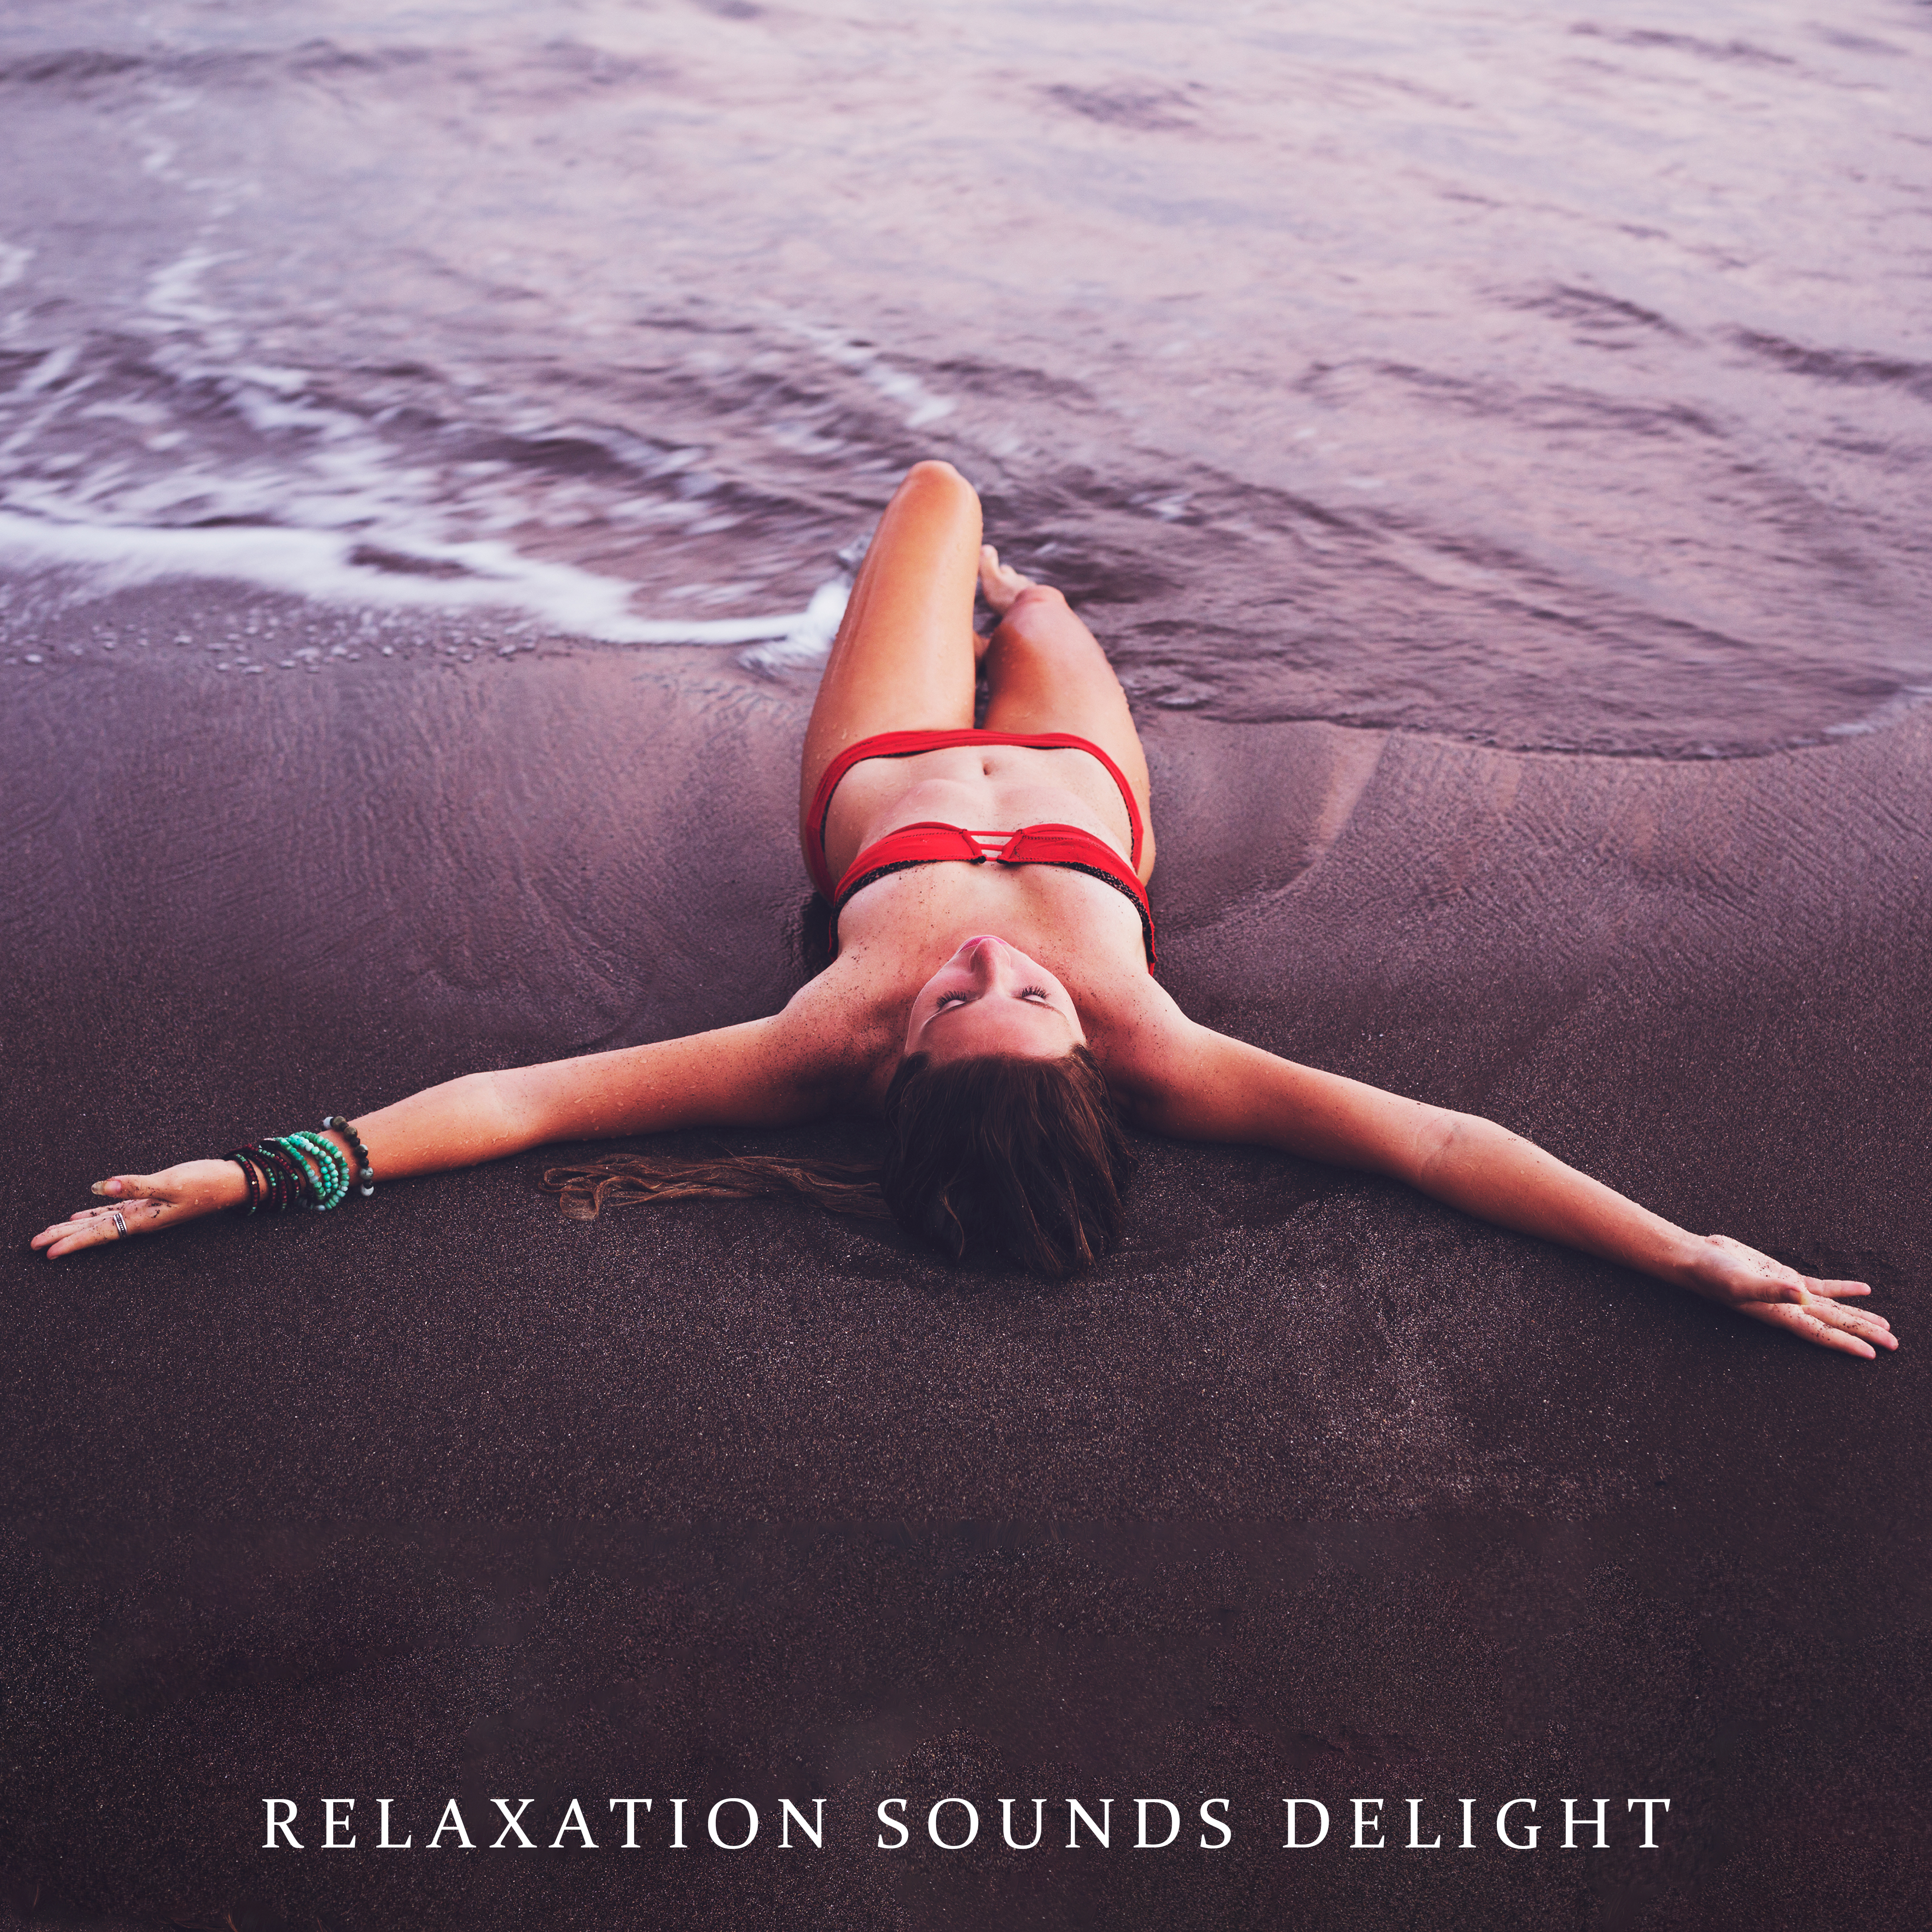 Relaxation Sounds Delight – Music for Spa, Wellness